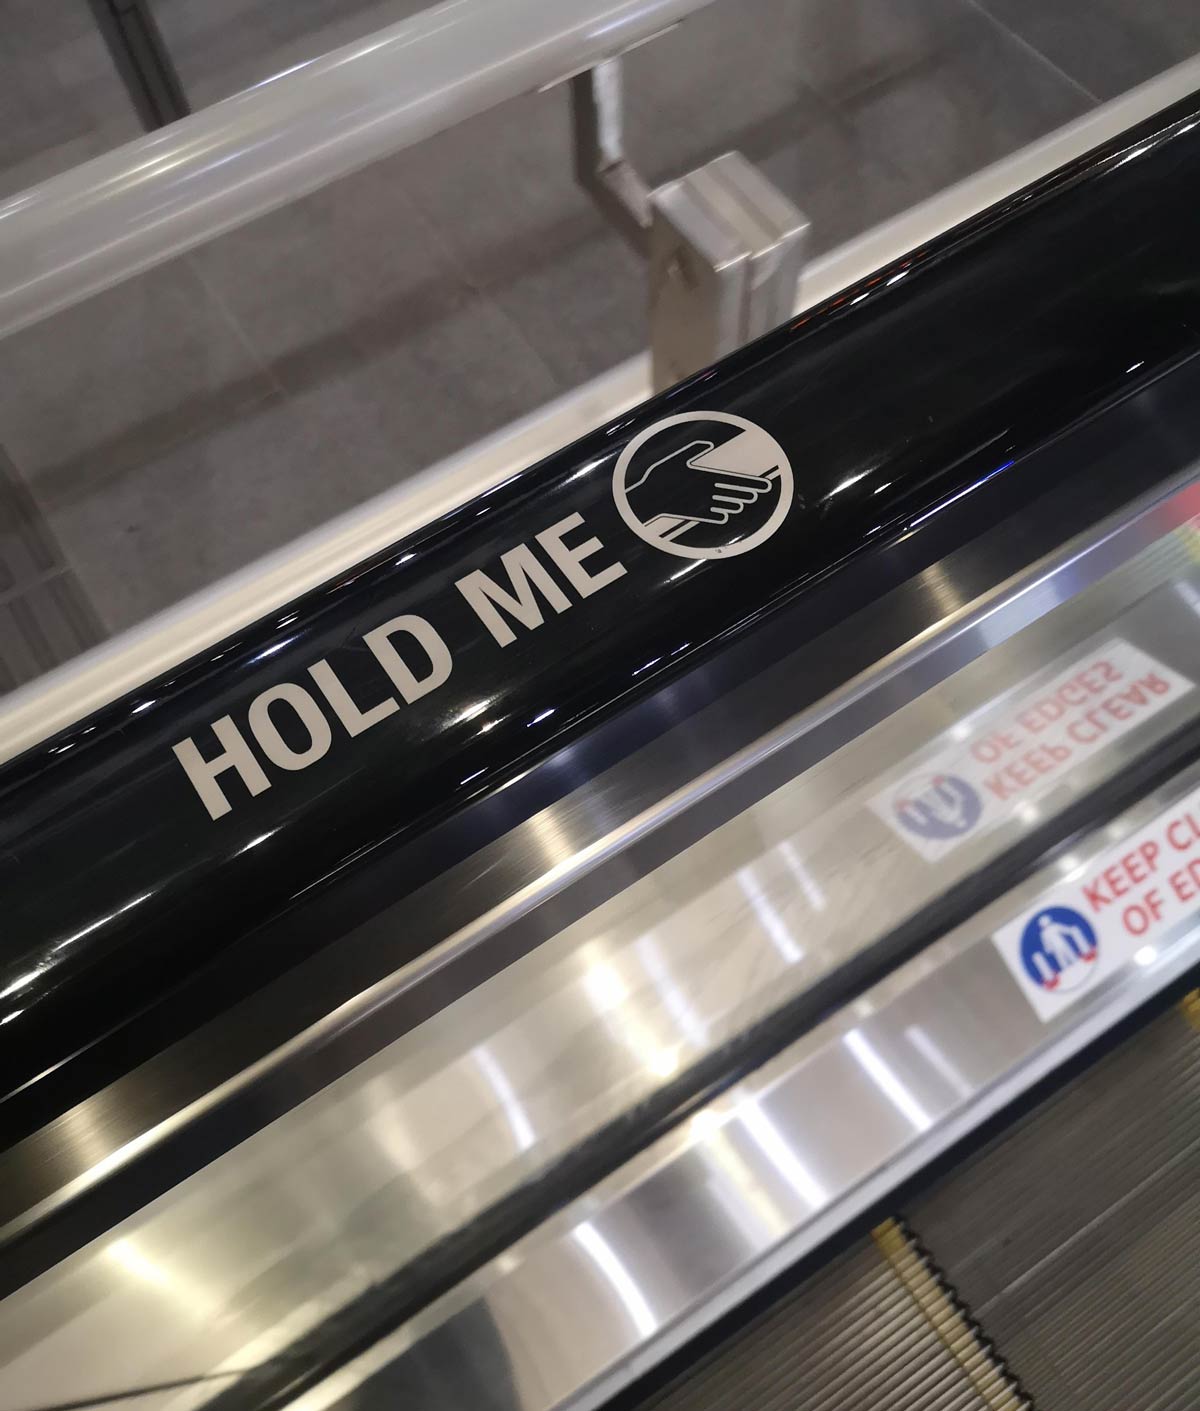 The escalator handrails in London are getting as needy as me